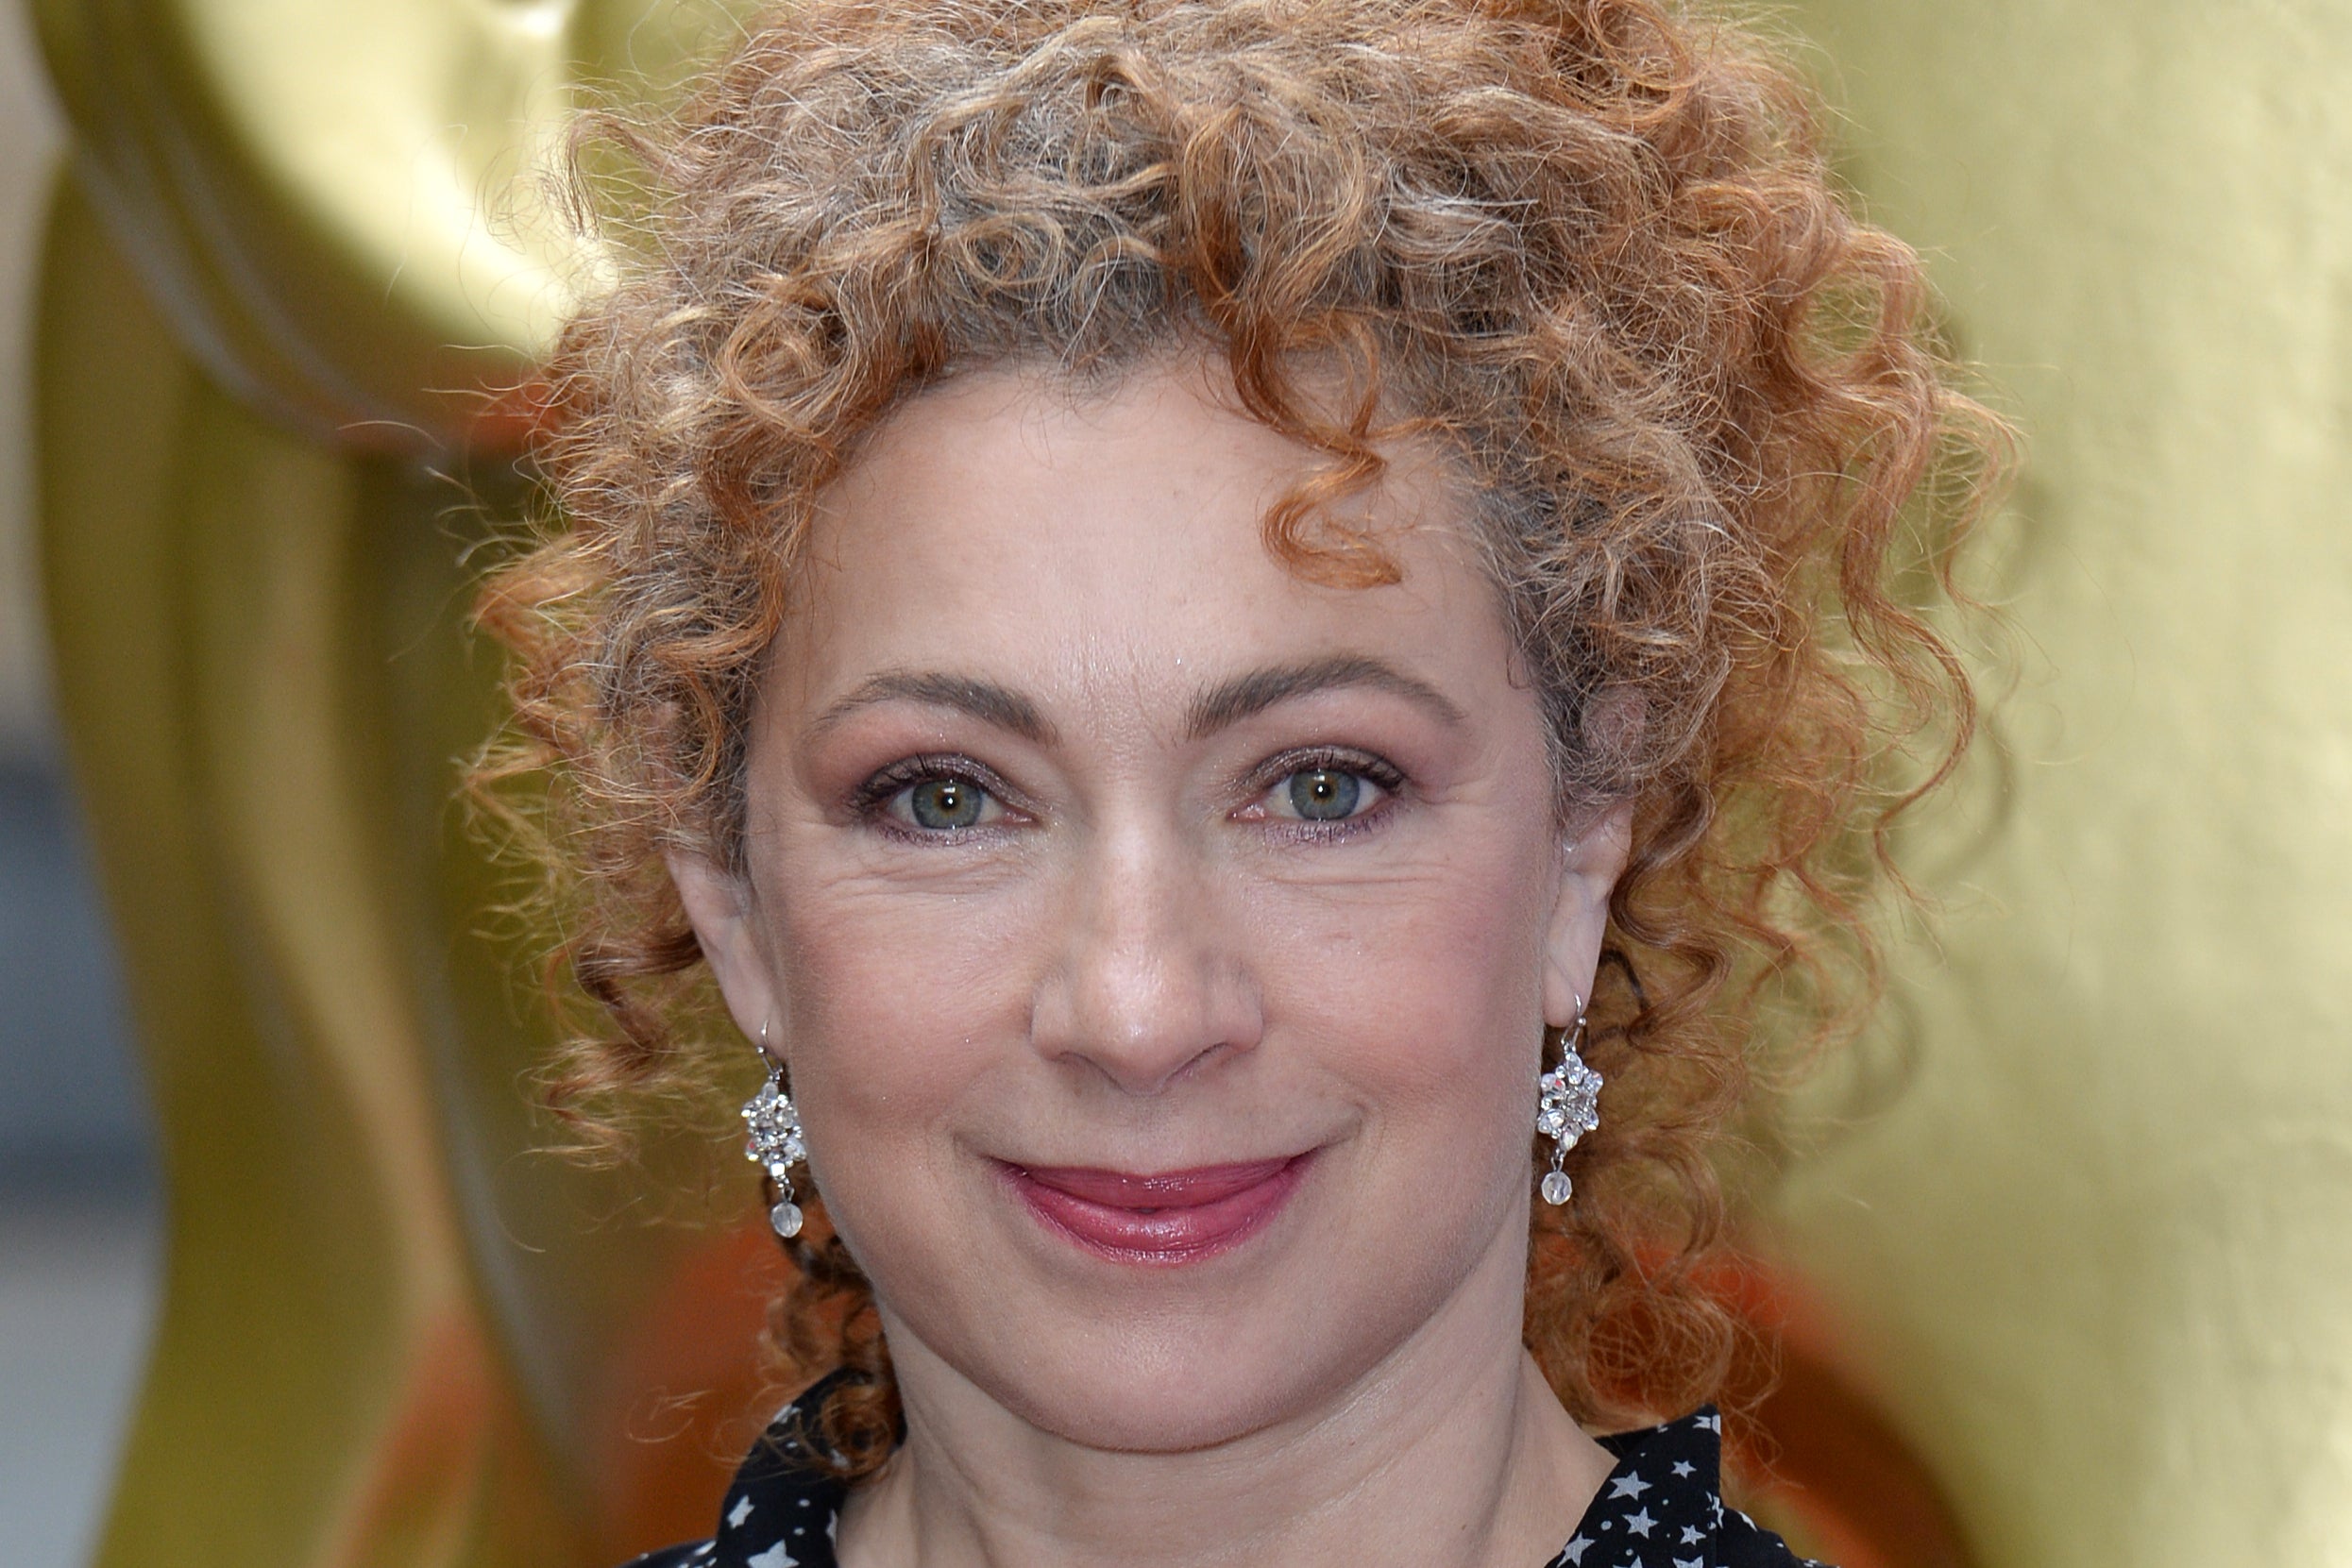 pronouns, alex kingston says she gets ‘really confused’ by pronouns